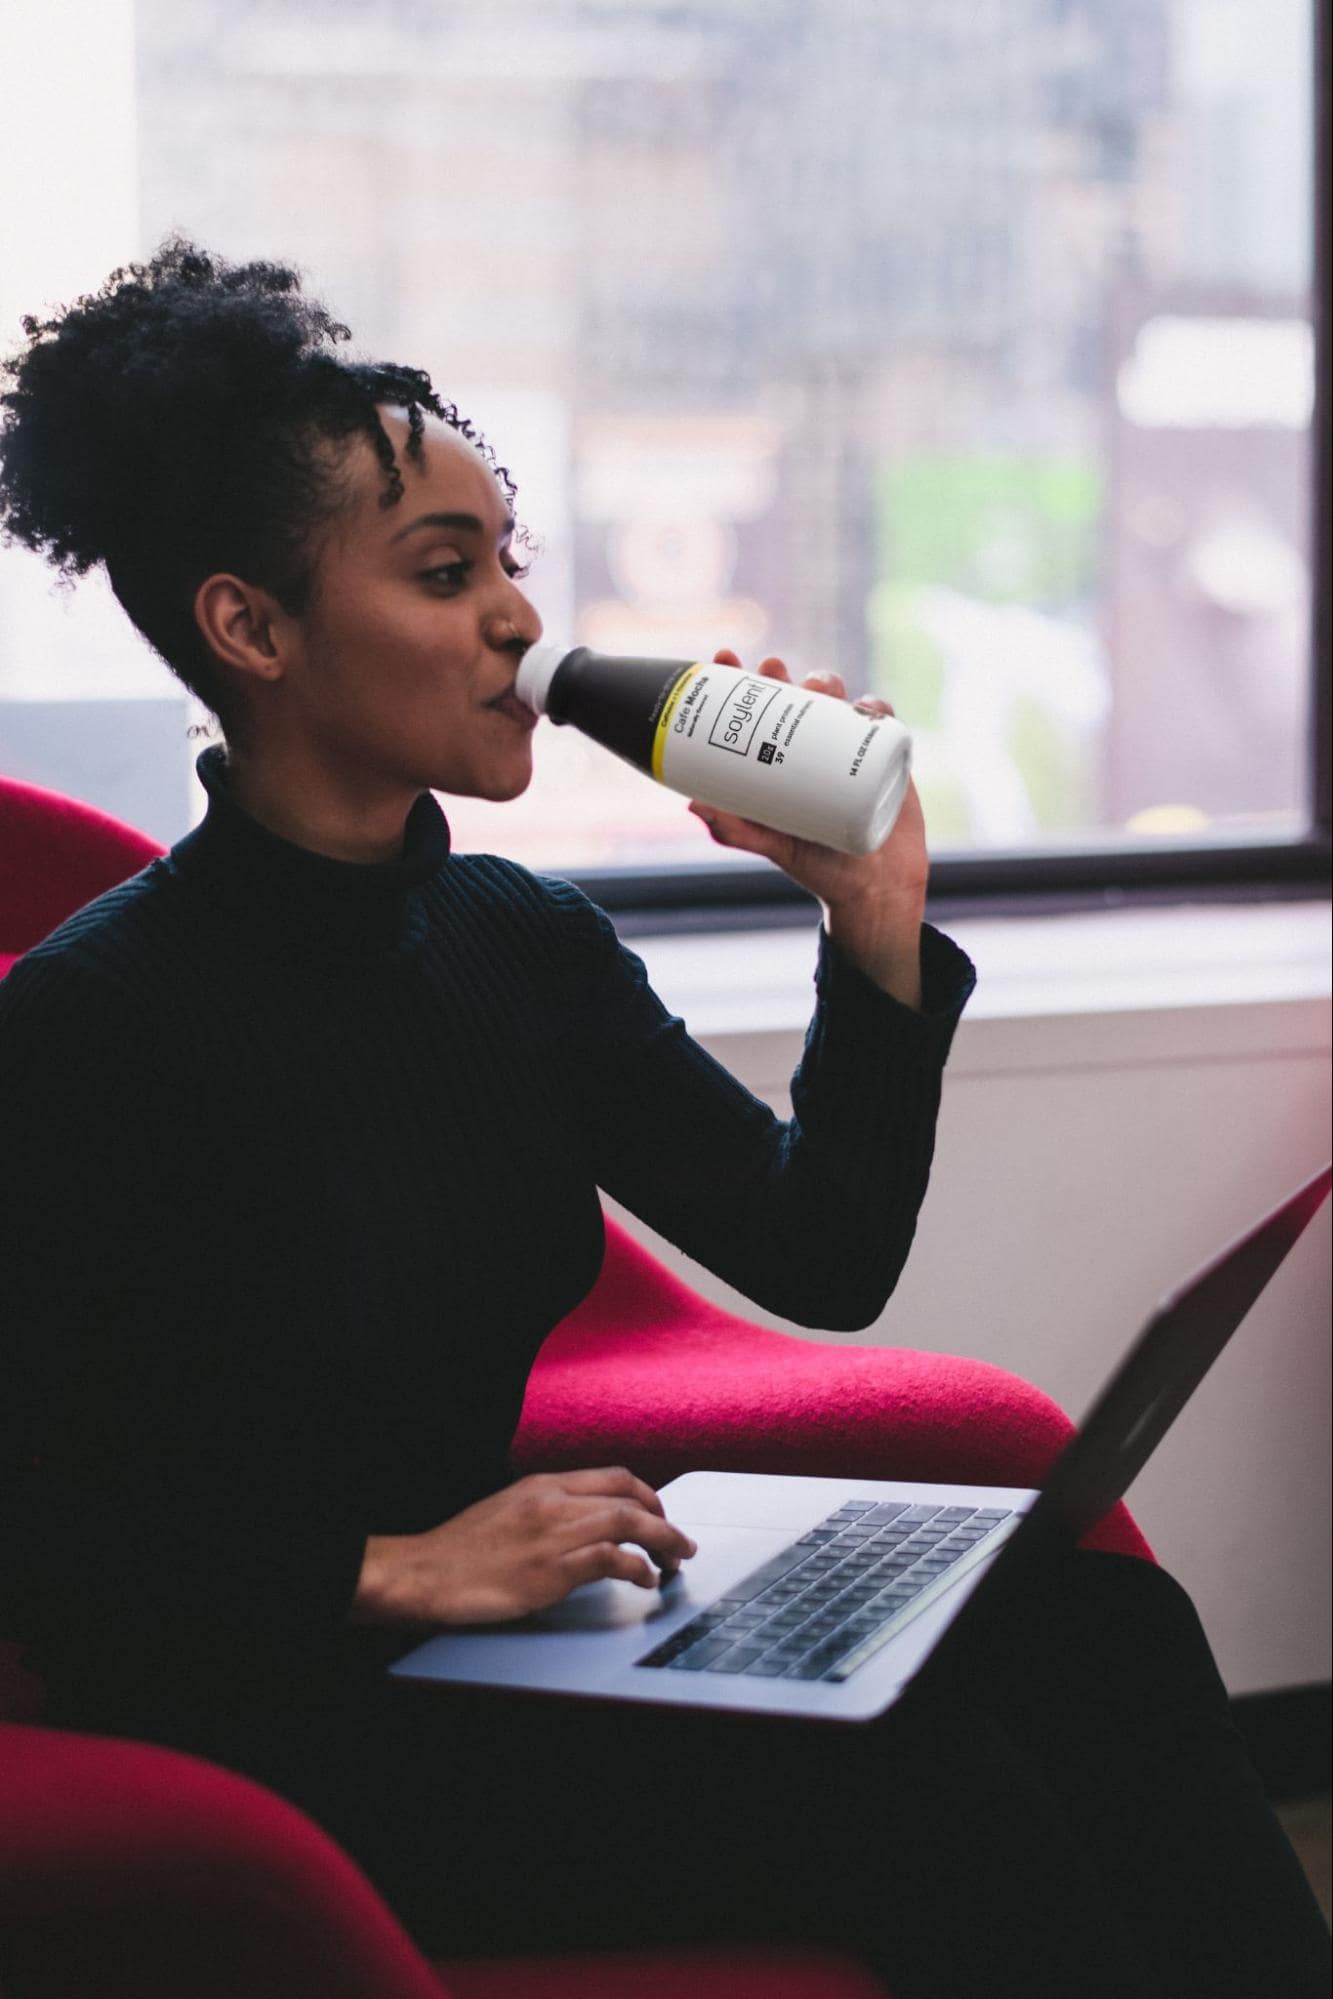 image of person drinking Soylent while working on laptop